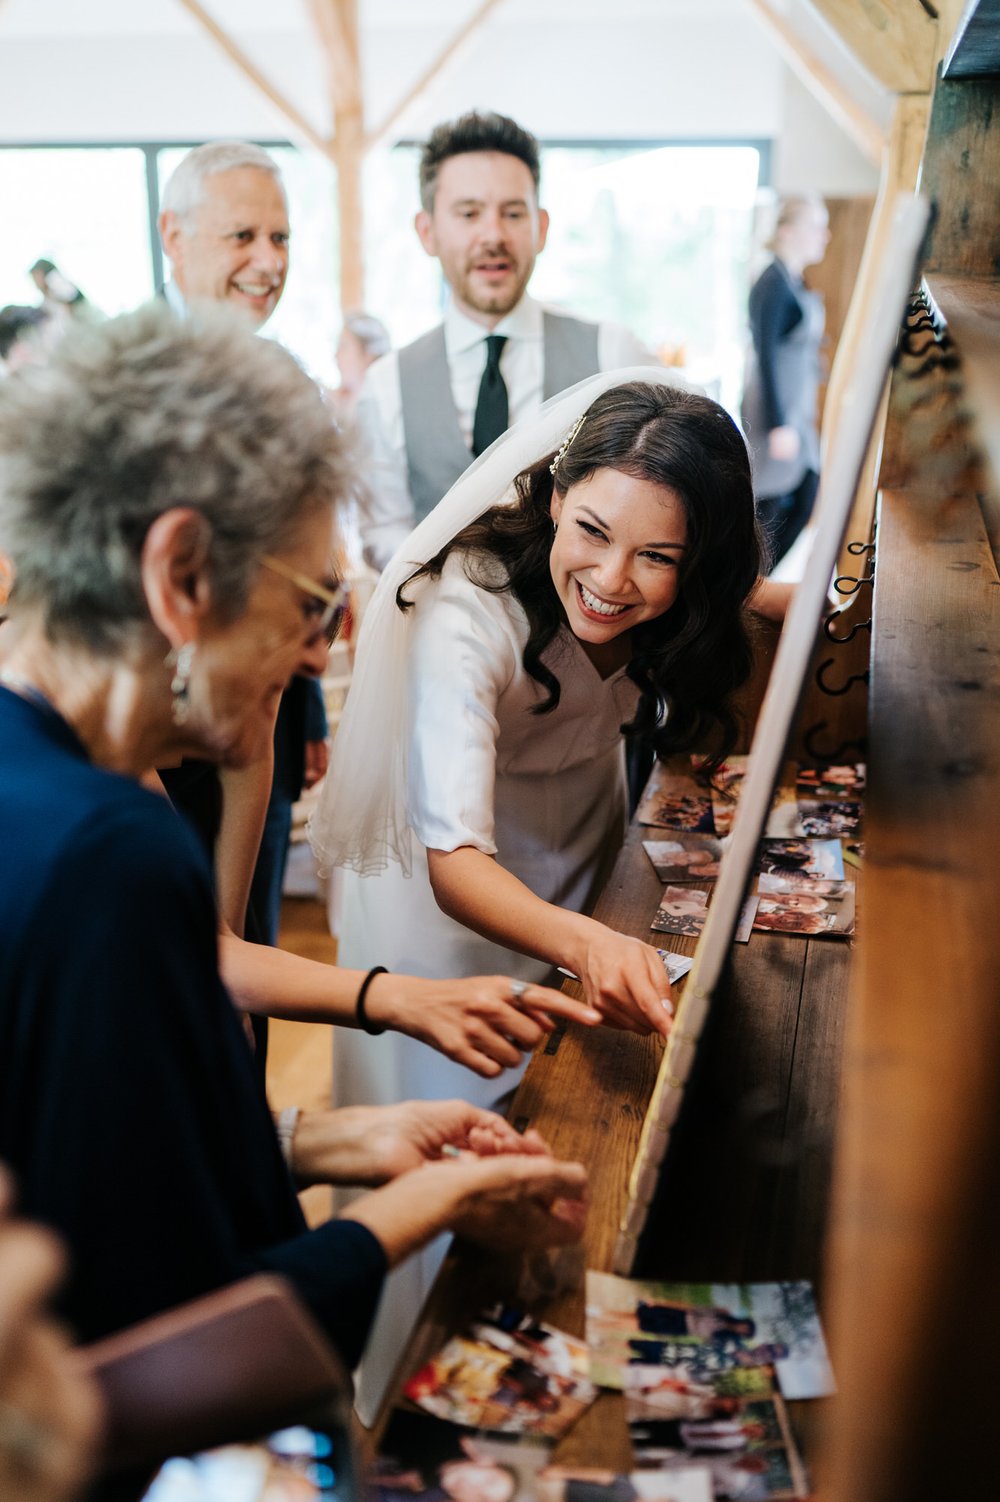 Bride points out relative on pinboard to elderly grandmother as they both smile